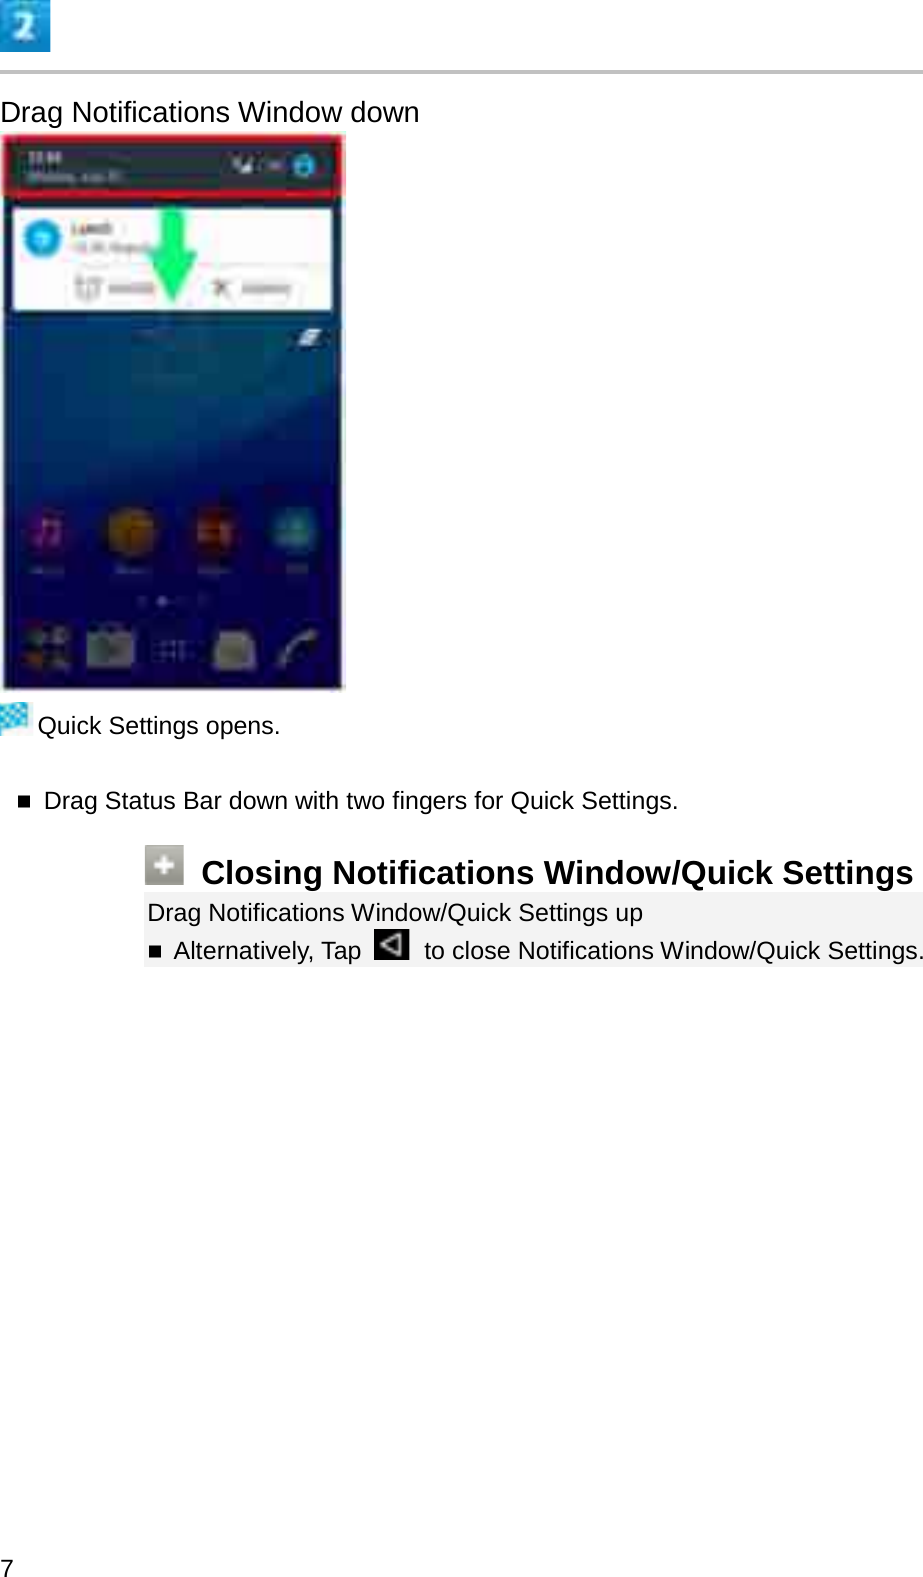 Drag Notifications Window downQuick Settings opens.Drag Status Bar down with two fingers for Quick Settings.Closing Notifications Window/Quick SettingsDrag Notifications Window/Quick Settings upAlternatively, Tap  to close Notifications Window/Quick Settings.7